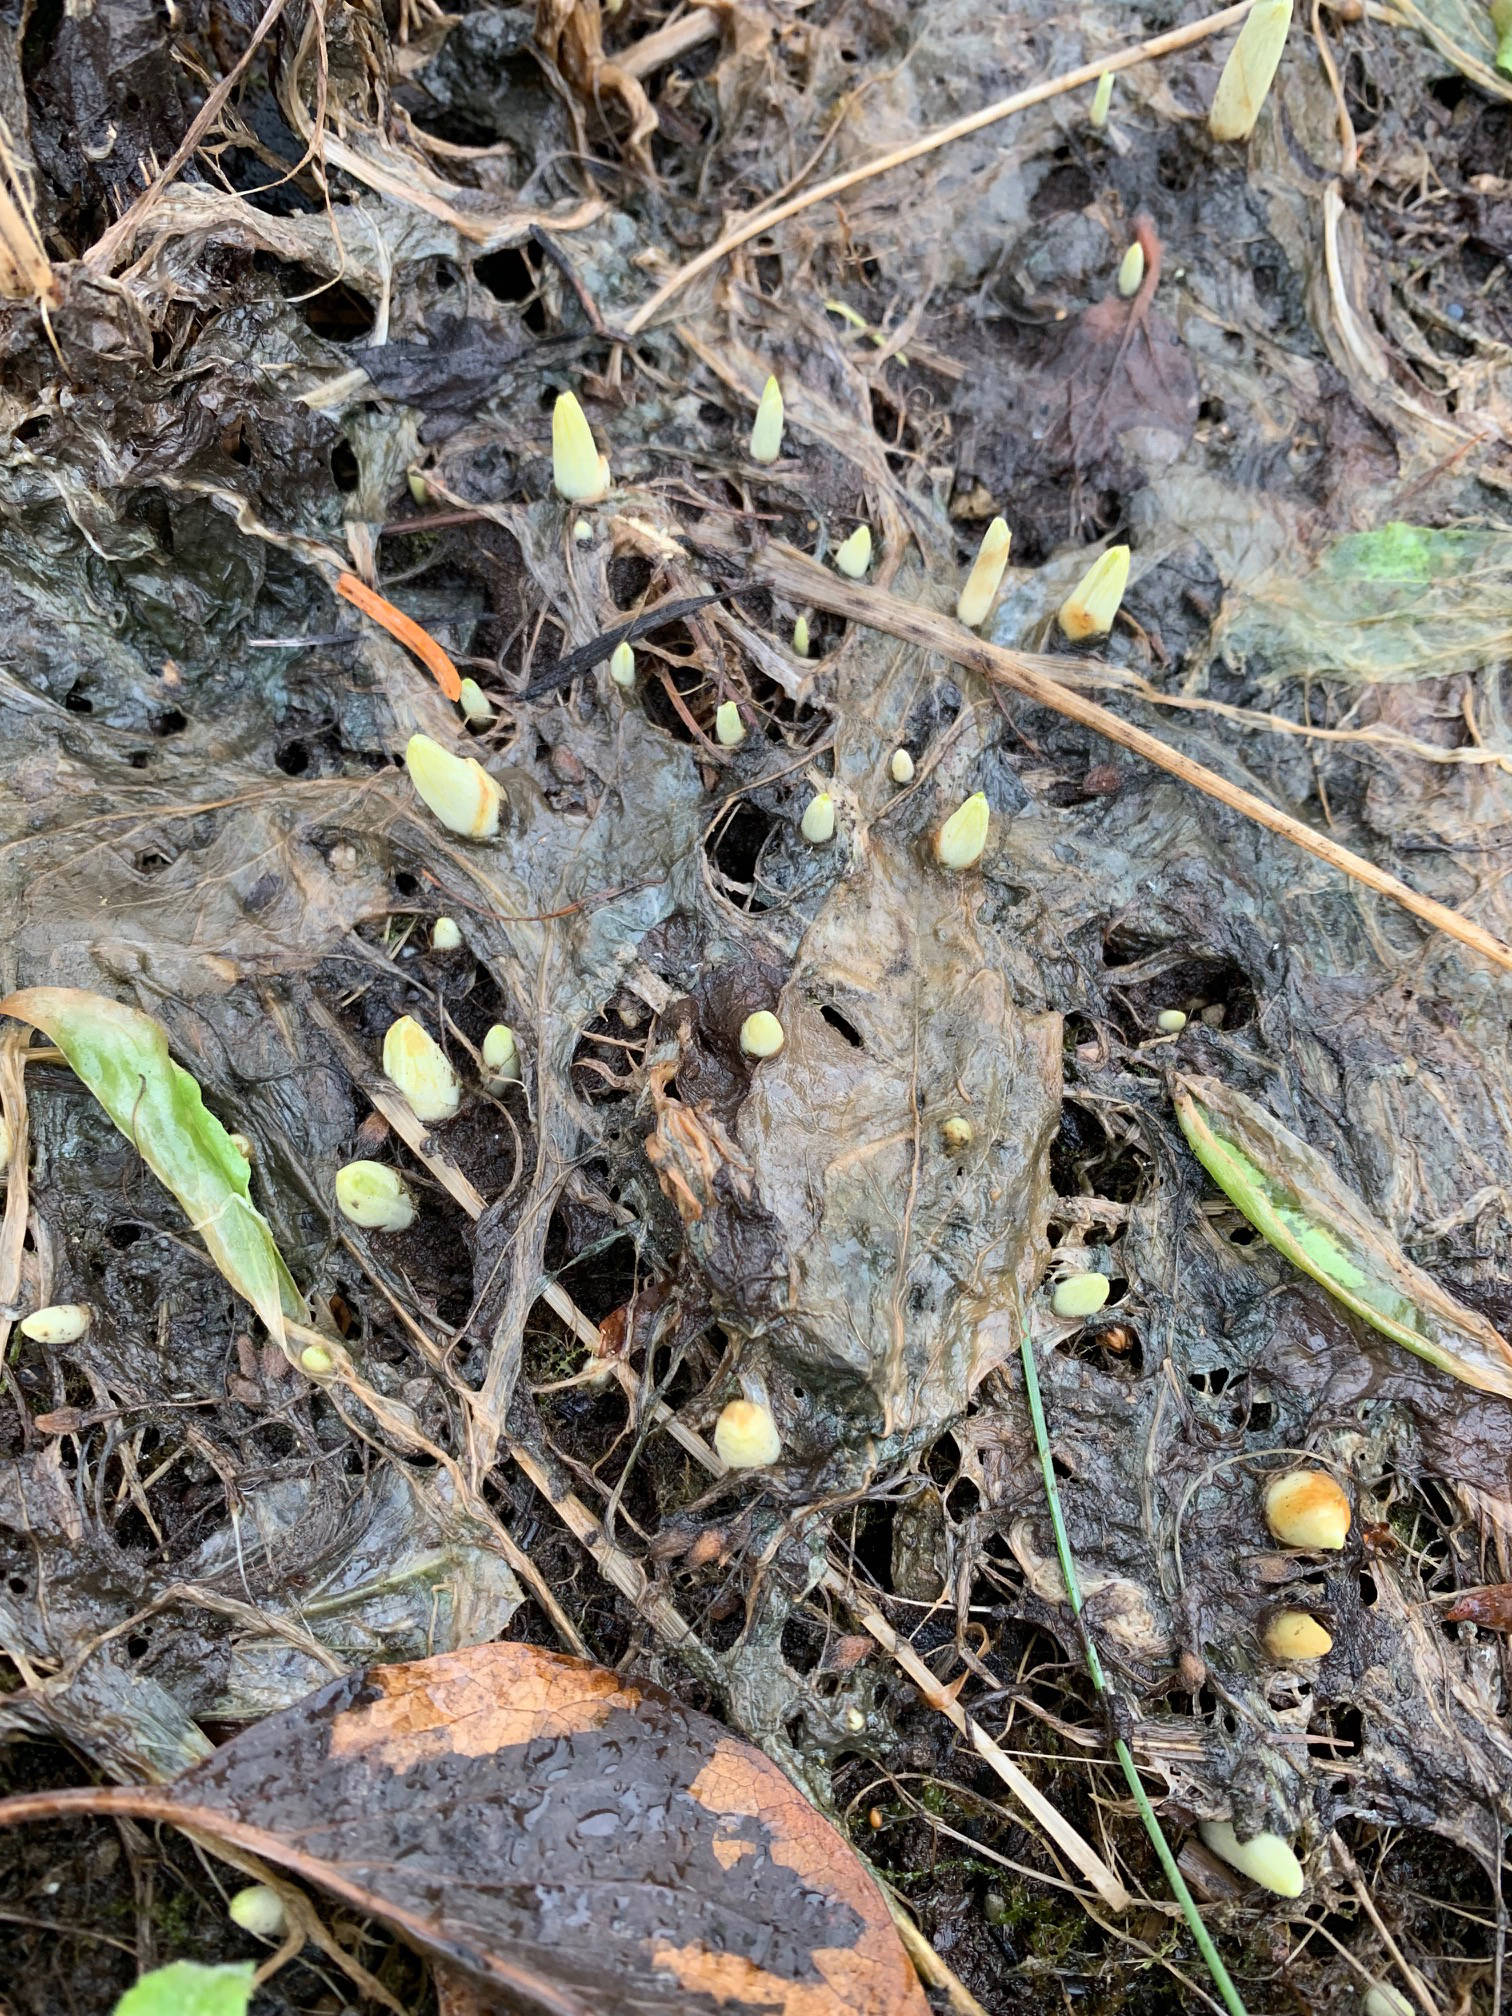 ”This may not be the most colorful photo, but I hope the promise of crocus breaking ground and seeking their destiny will cradle your soul and warm your heart,” the Kachemak Gardener writes of crocus emerging at her garden on March 8, 2019, in Homer, Alaska. (Photo by Rosemary Fitzpatrick/Homer News)